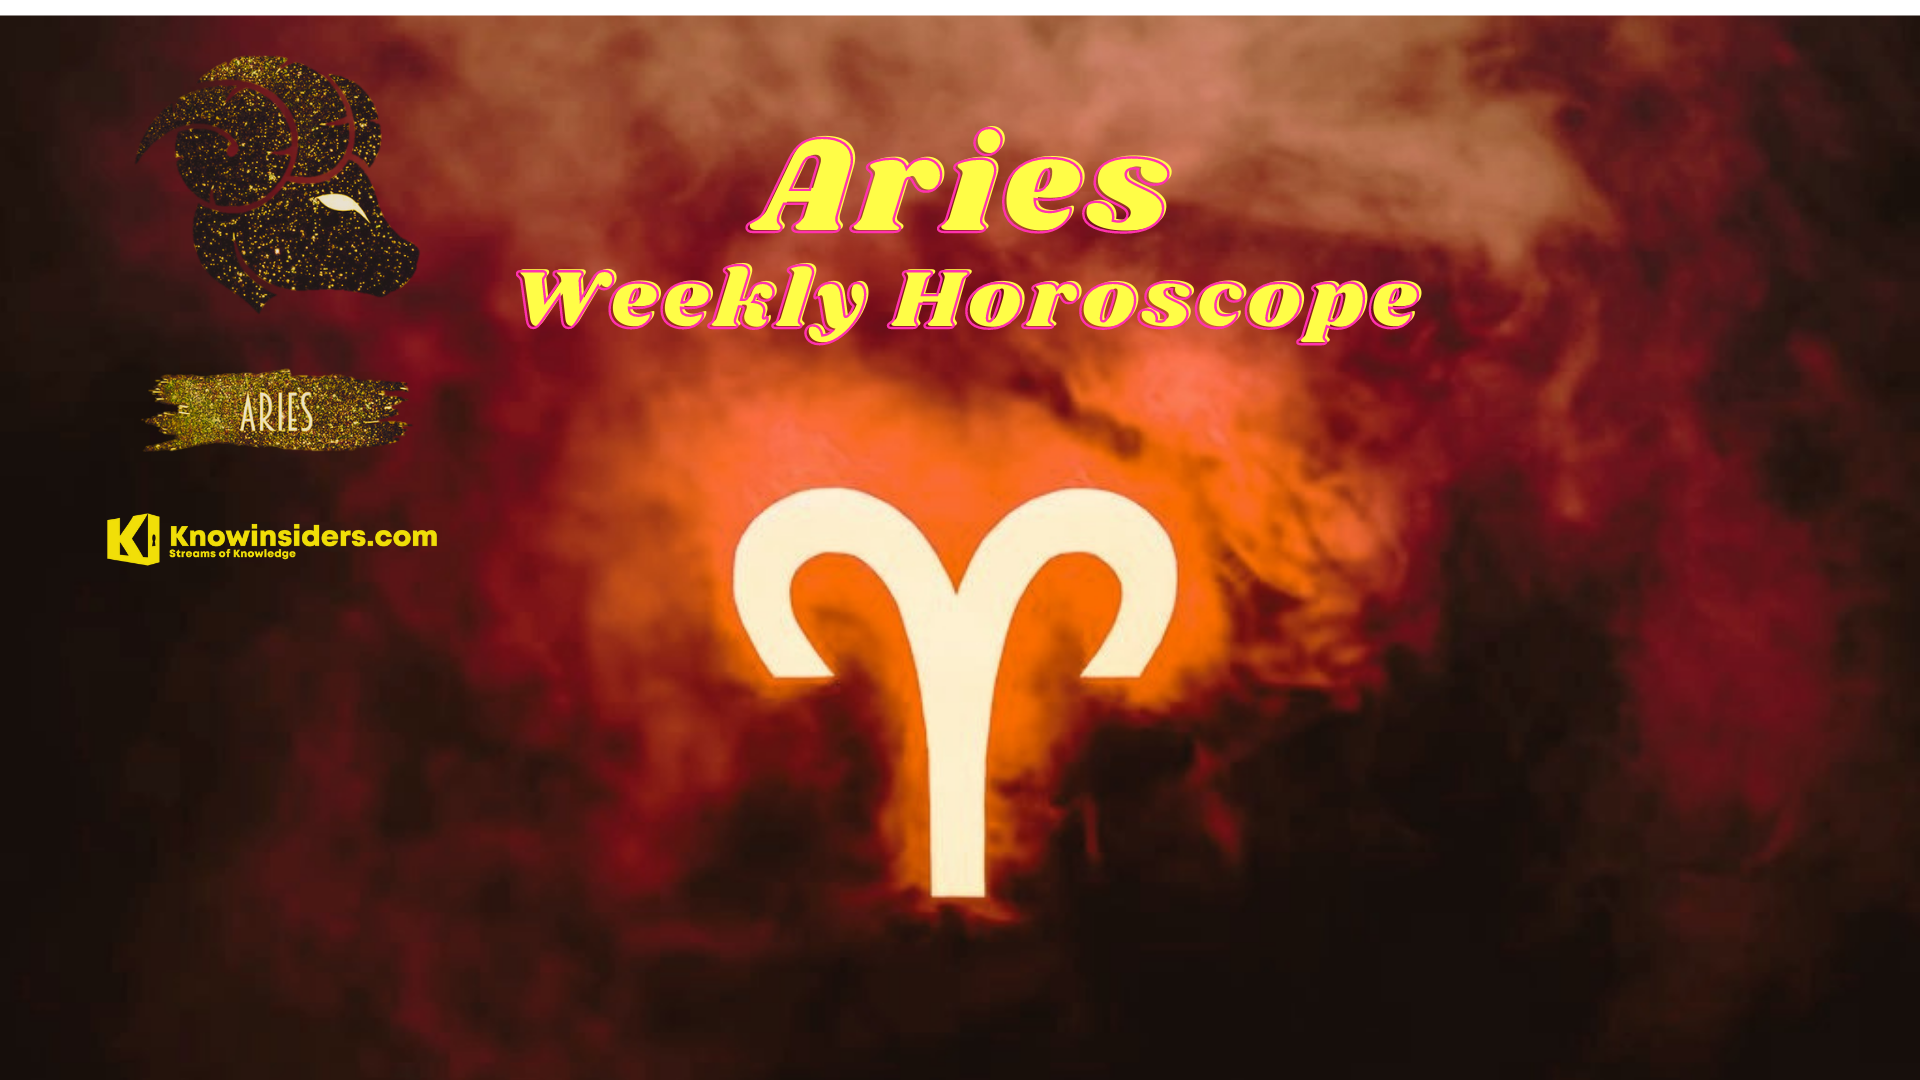 Aries Weekly Horoscope from 9 to 15 August 2021